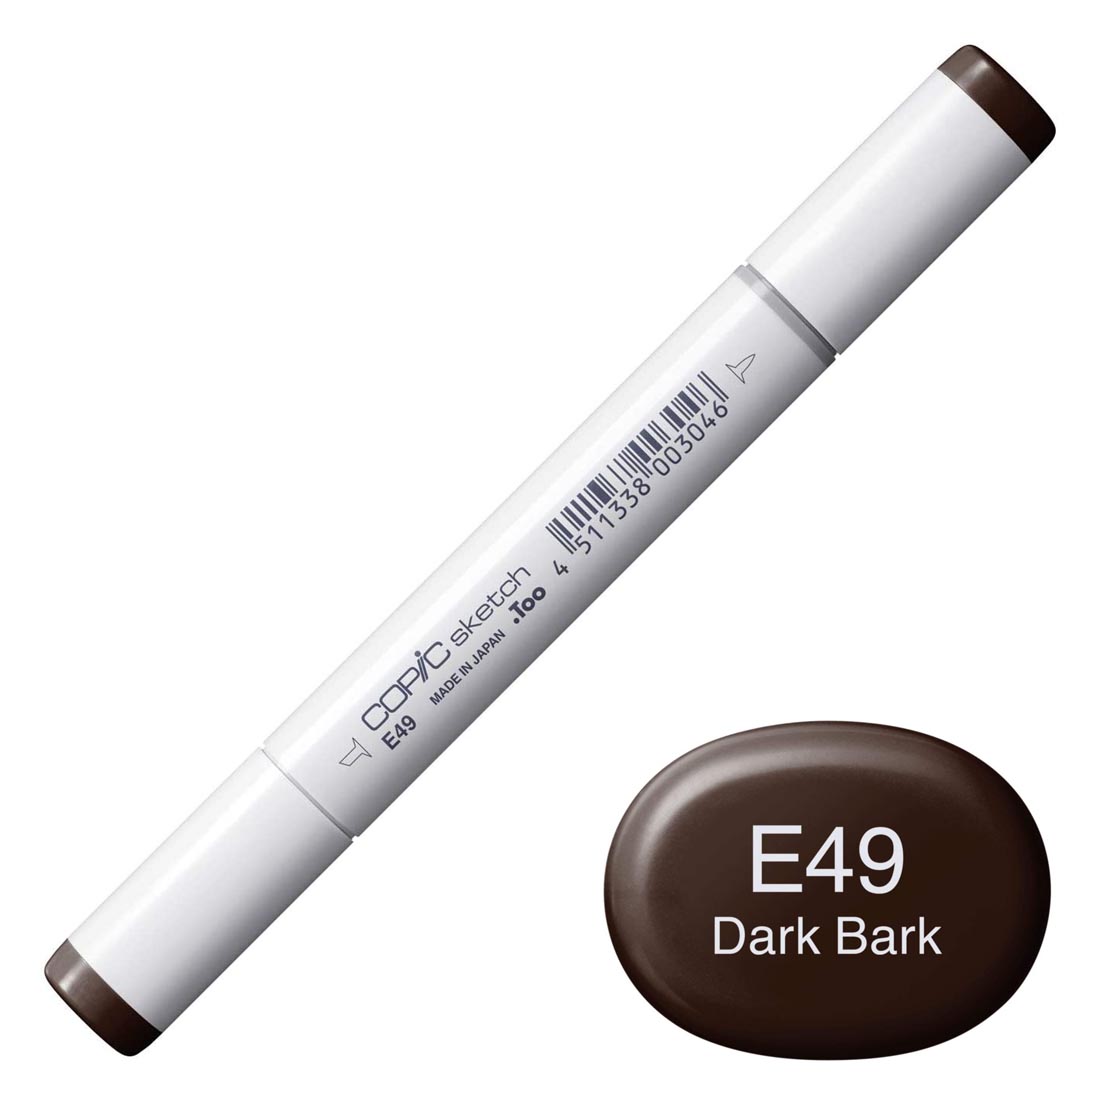 COPIC Sketch Marker with a color swatch and text of E49 Dark Bark